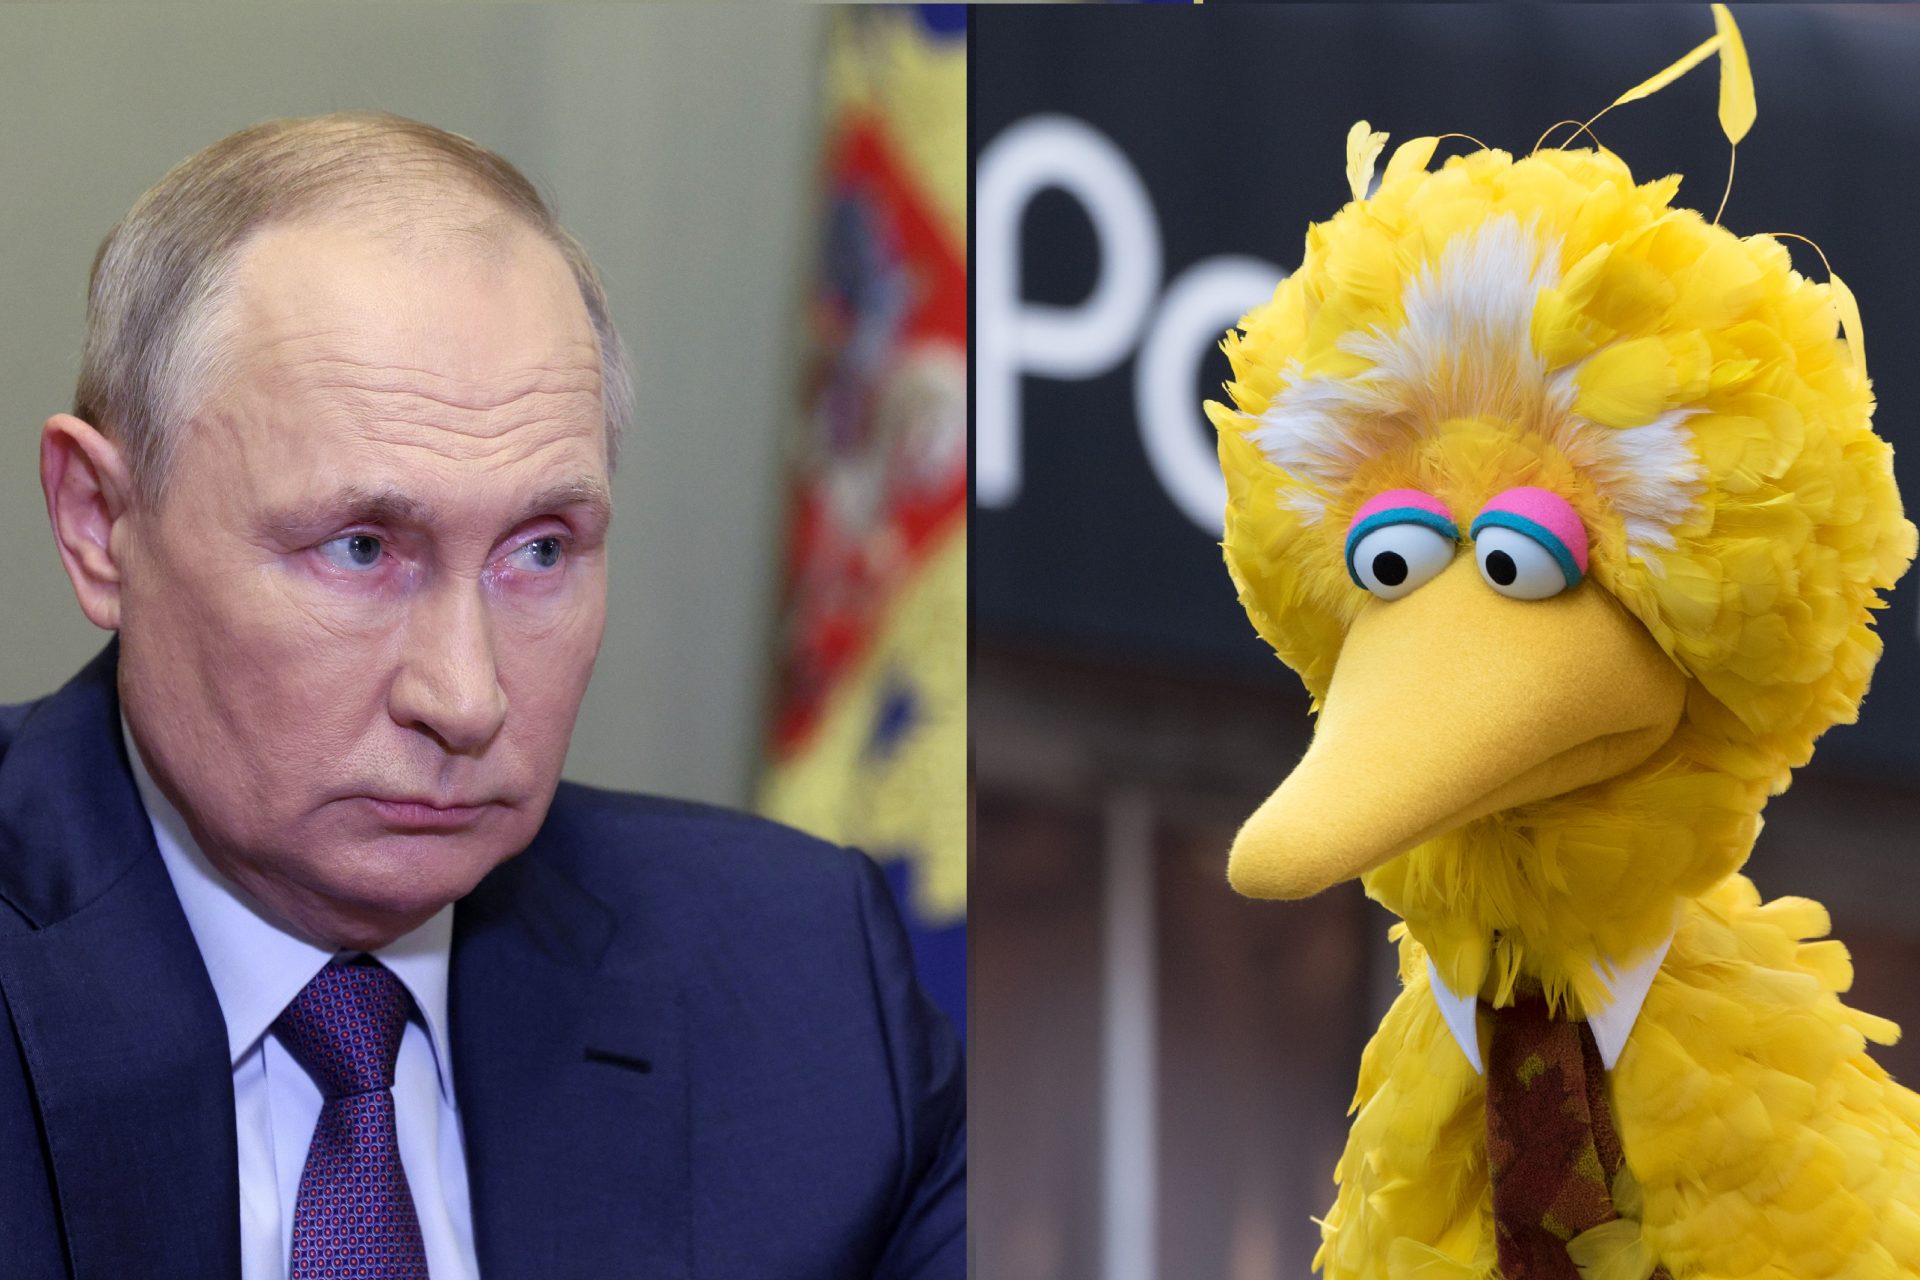 Putin vs Big Bird: The wild story of the muppets in Moscow